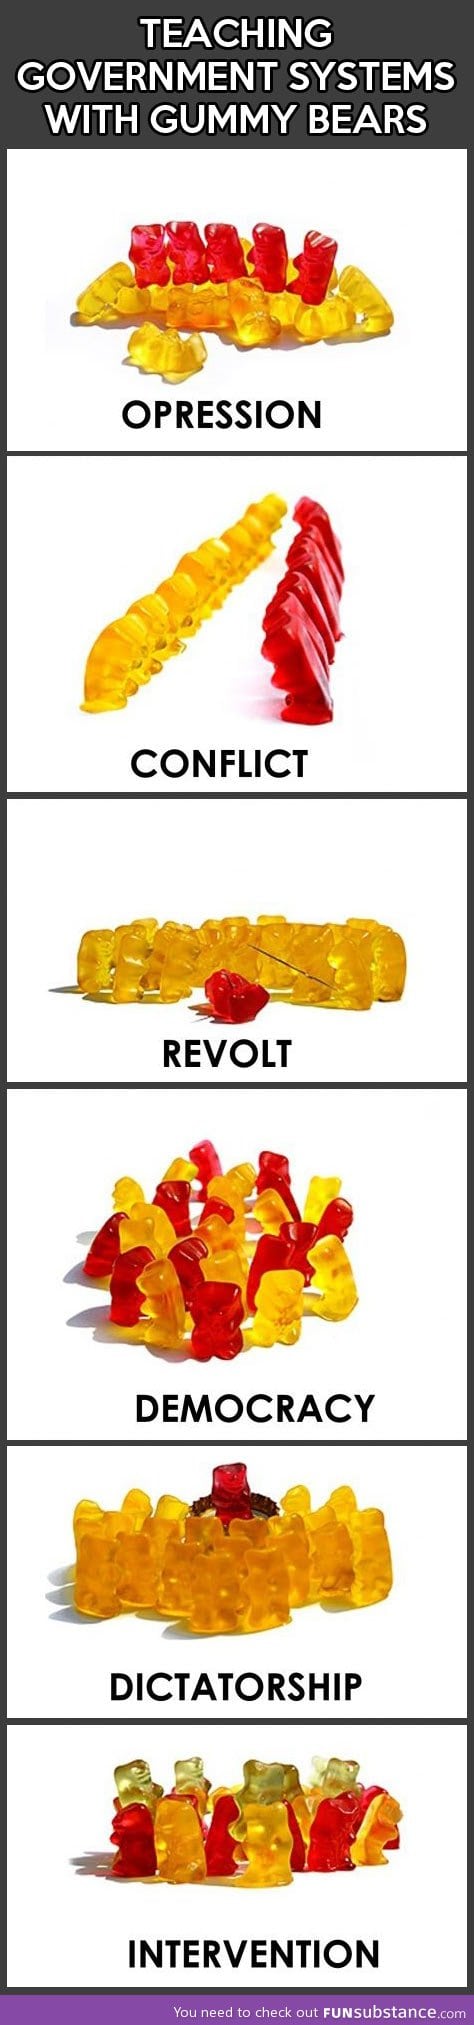 Understanding government systems with gummy bears